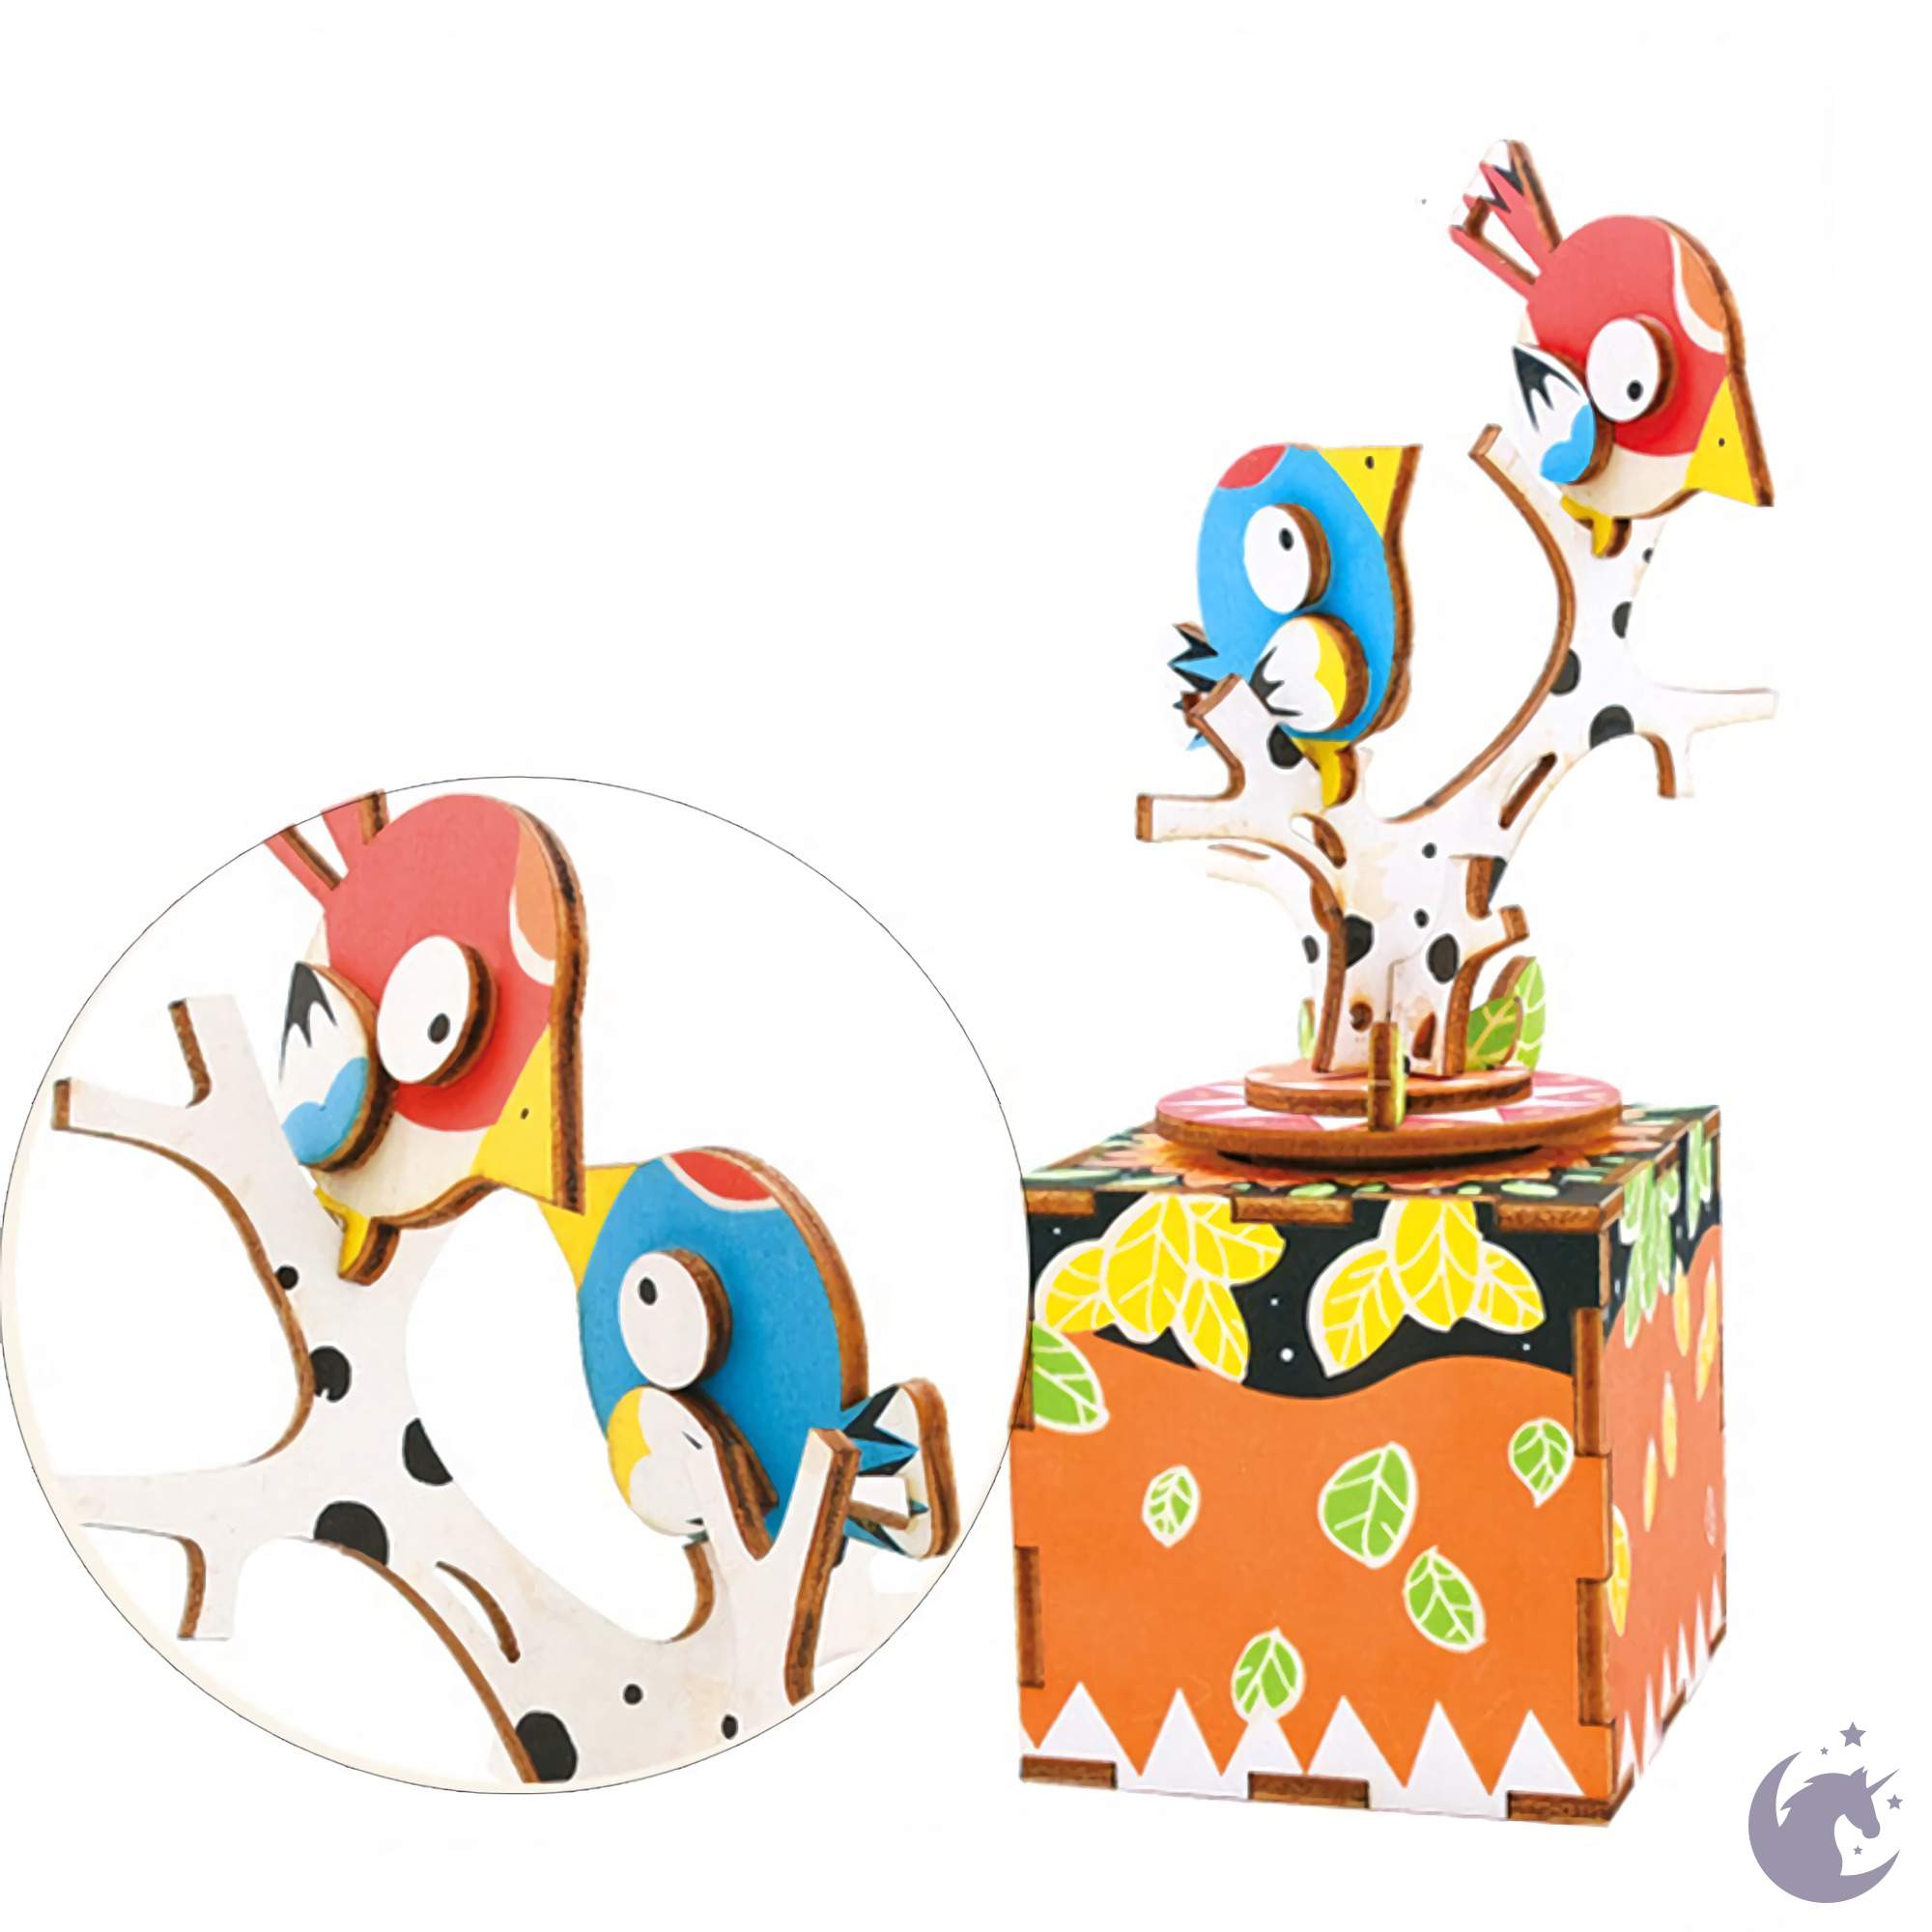 unicorntoys robotime rolife bird and tree diy music box 3d wooden puzzle birthday gift kits for teens AM301